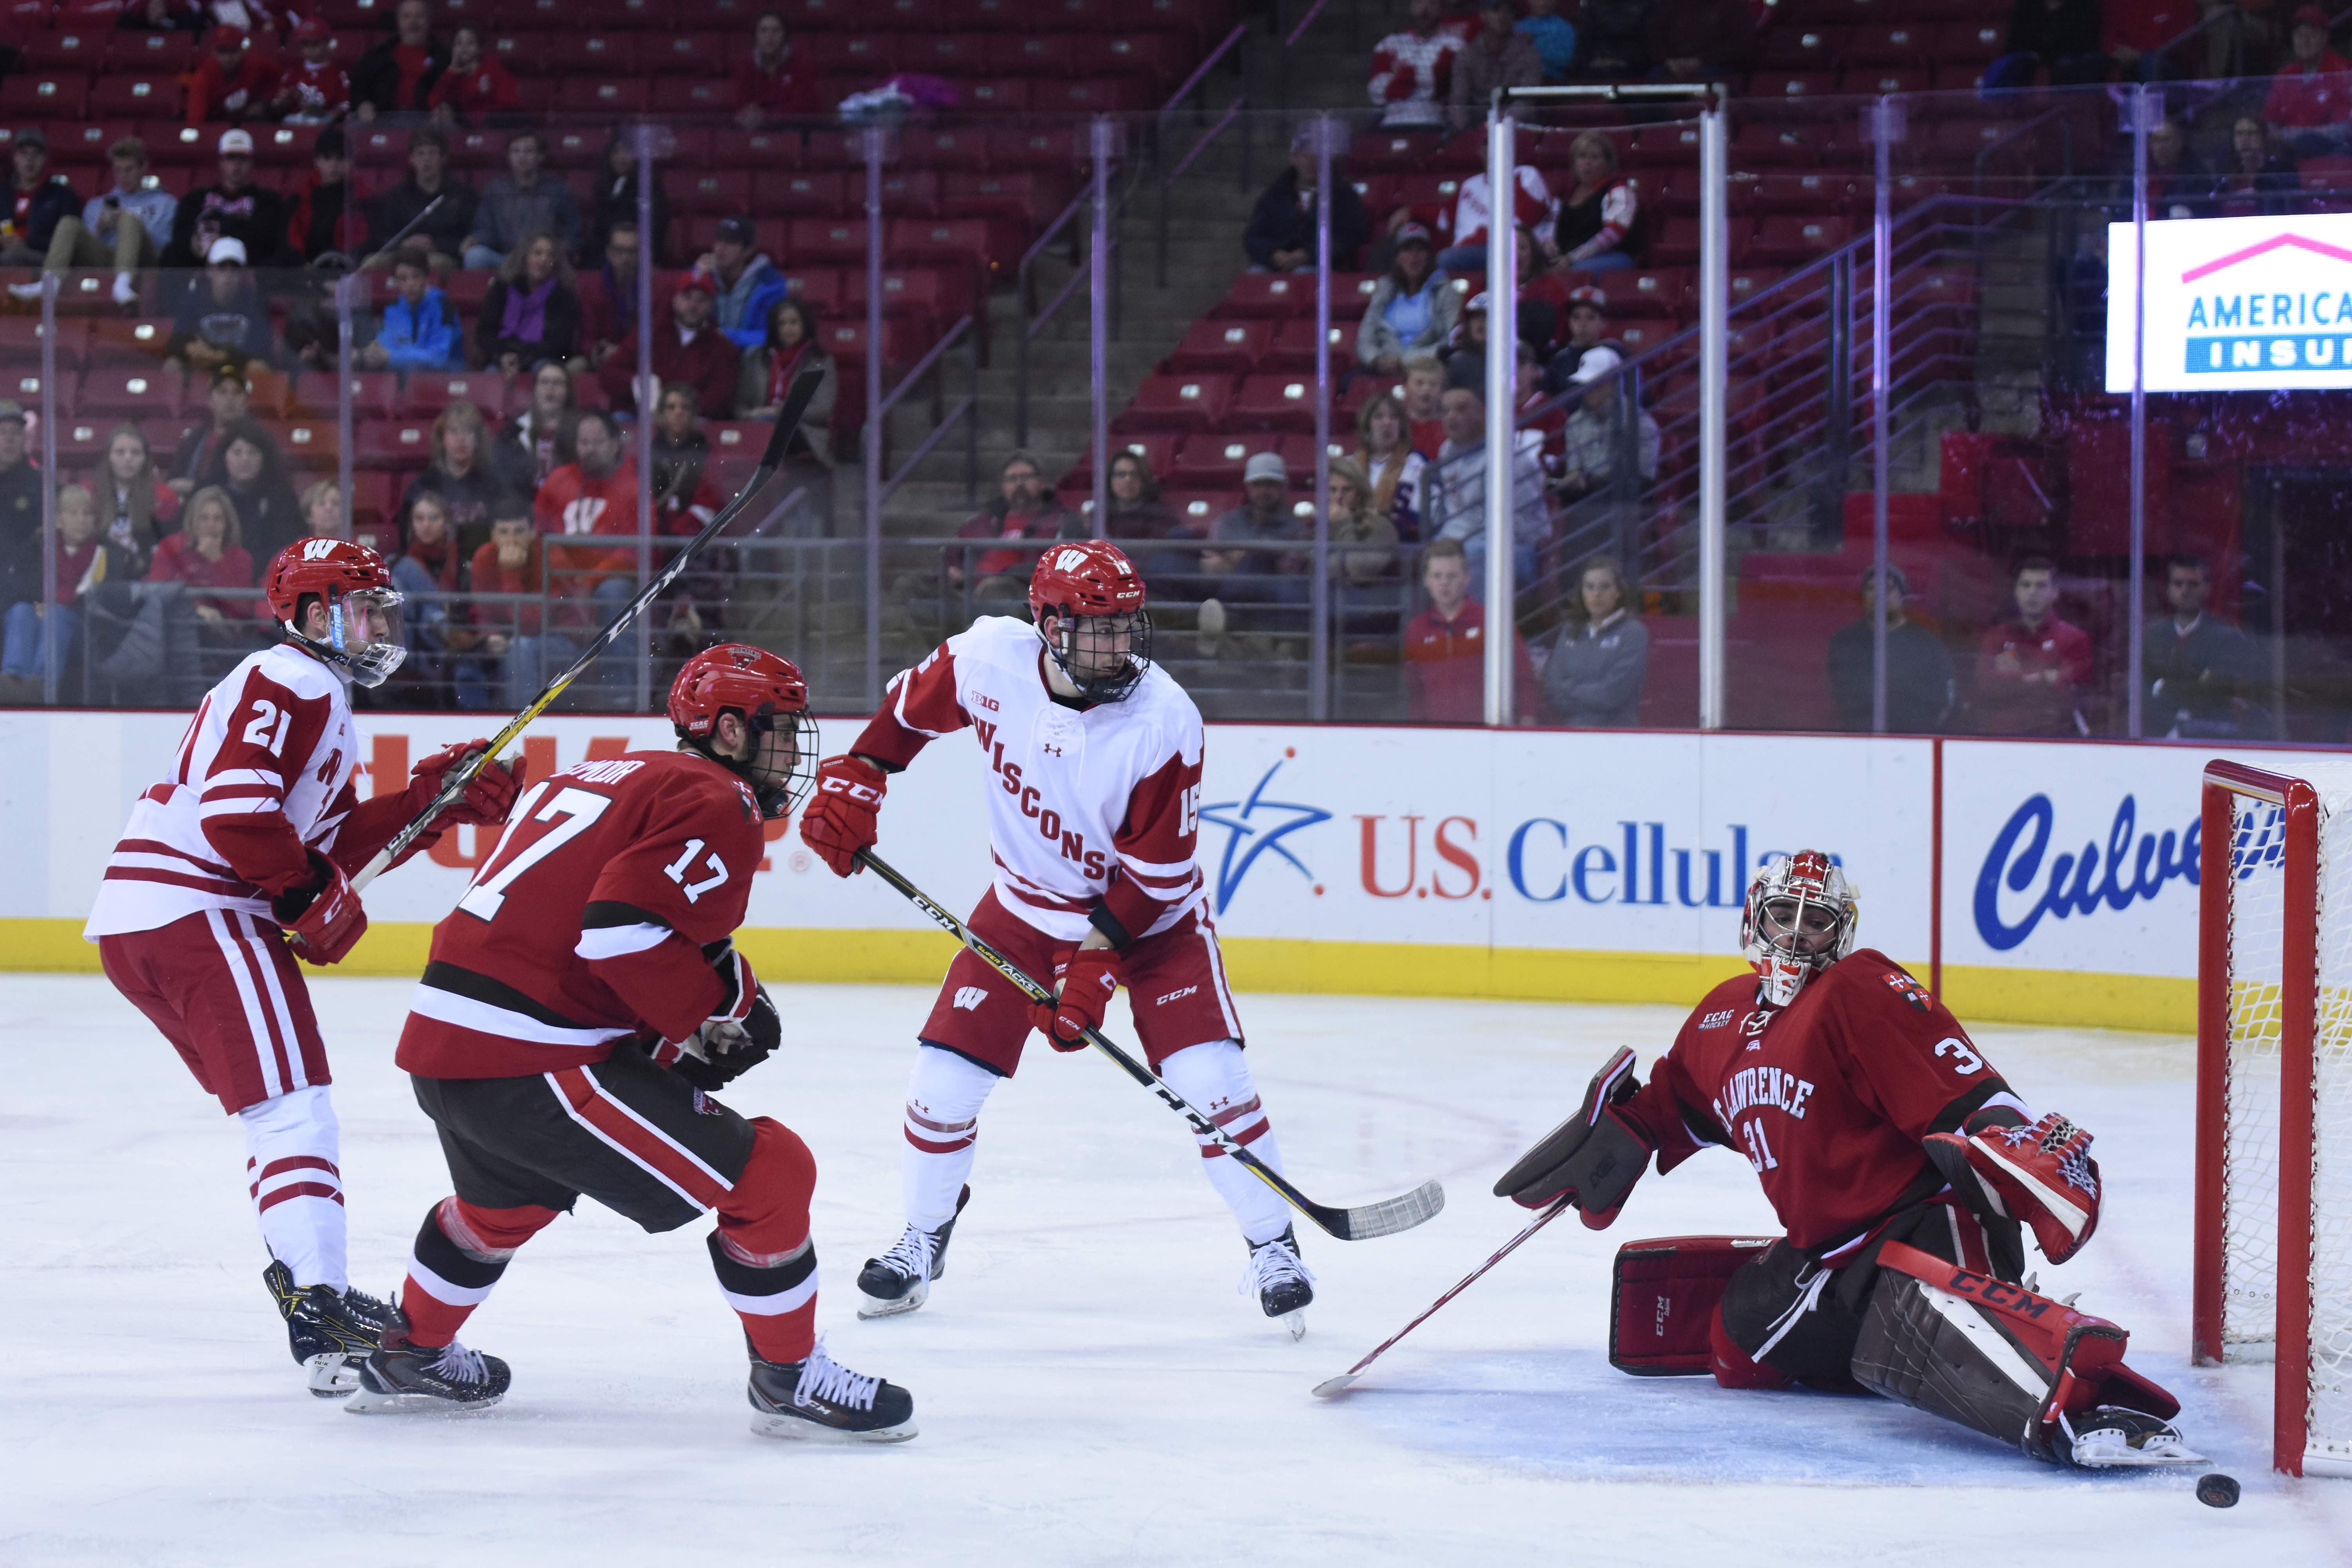 Men’s hockey: Wisconsin ties series with St. Lawrence, falls to No. 7